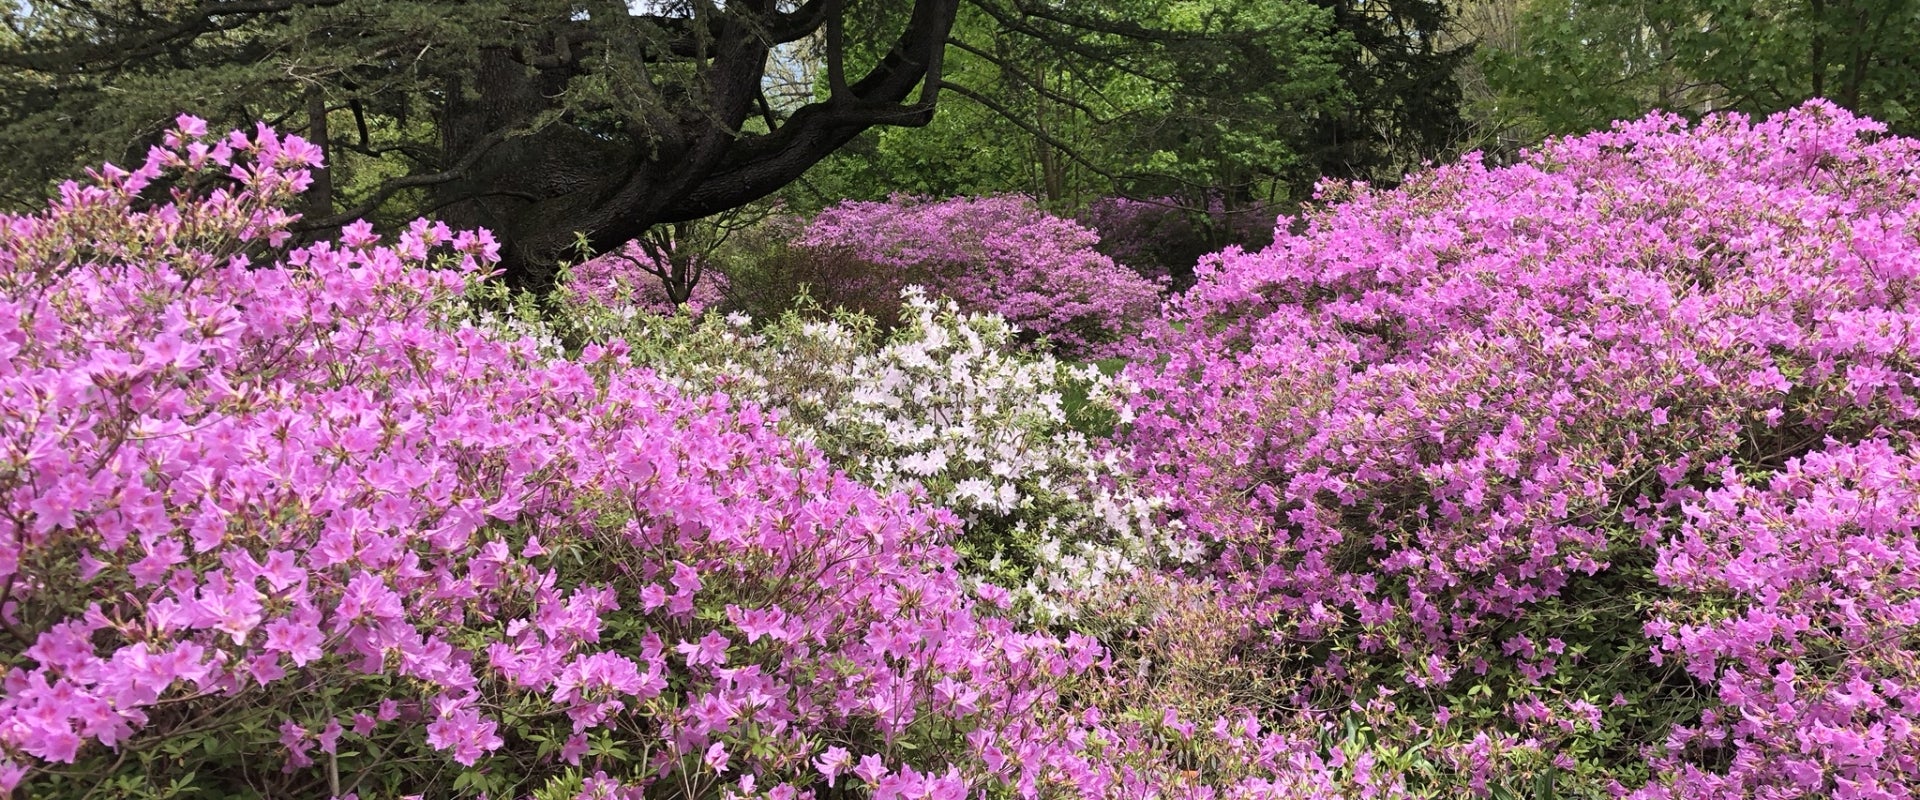 Pink and white azaleas in bloom.